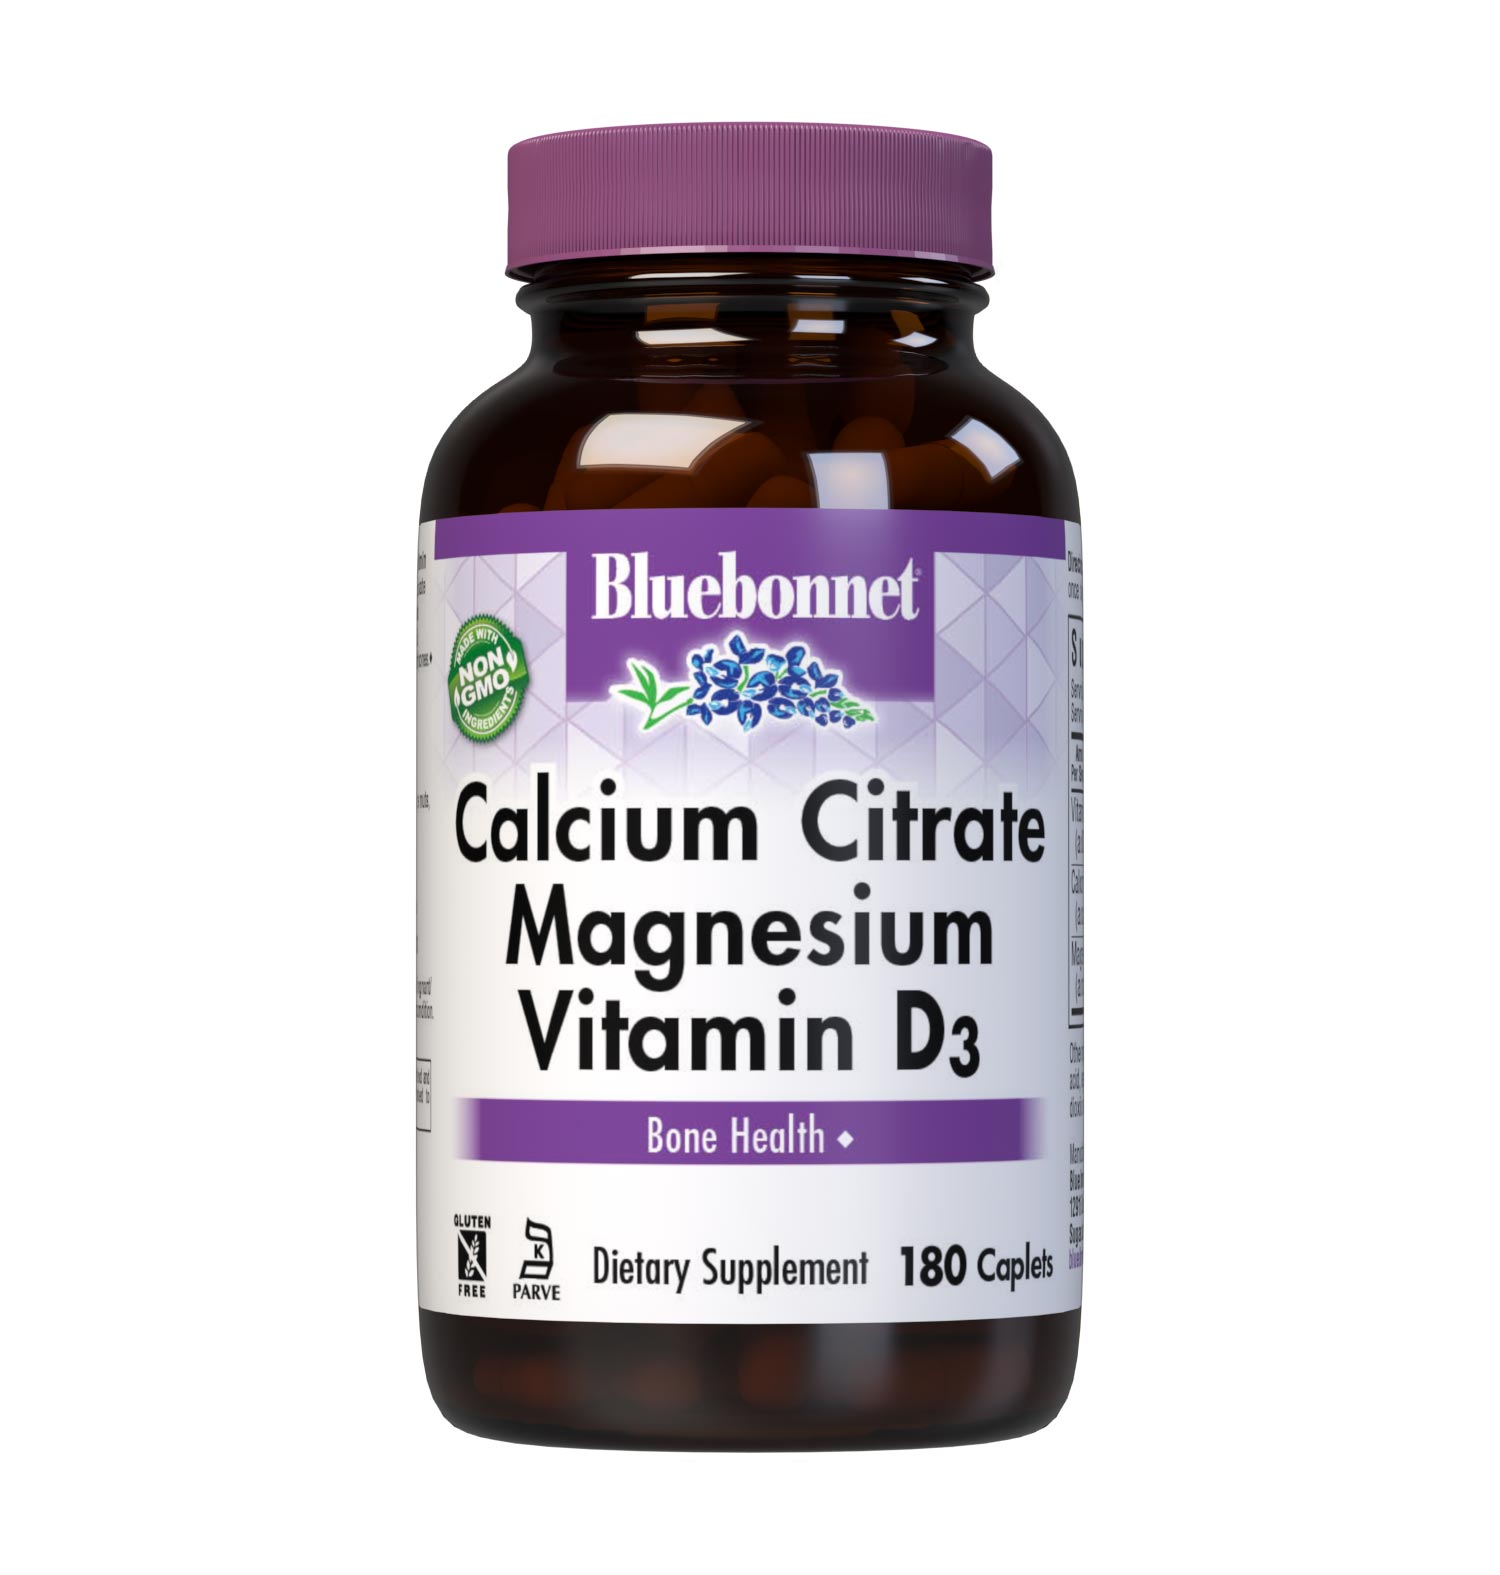 Bluebonnet's Calcium Citrate Magnesium Vitamin D3 180 Caplets are formulated with calcium in a chelate of calcium citrate and magnesium in a chelate of magnesium aspartate along with Vitamin D3 (cholecalciferol) from lanolin for strong, healthy bones. #size_180 count